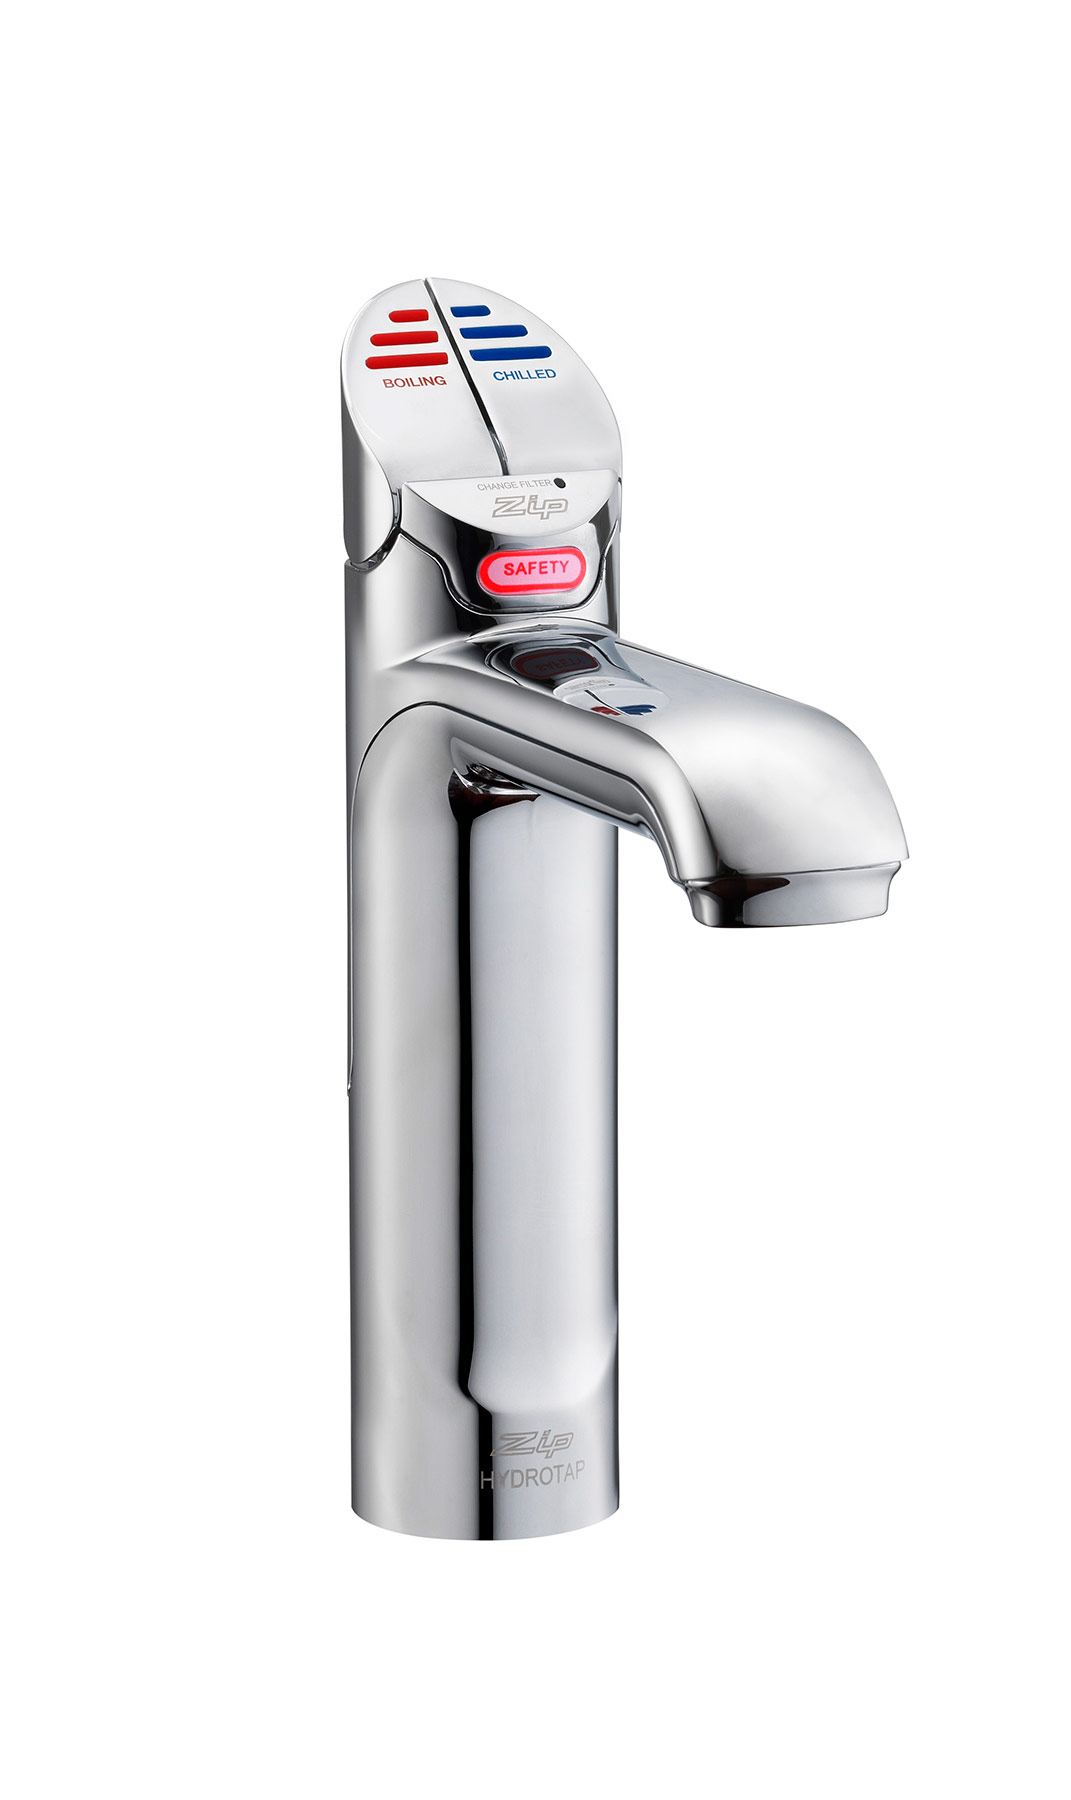 Modern HydroTap Classic Boiling, Chilled Faucet